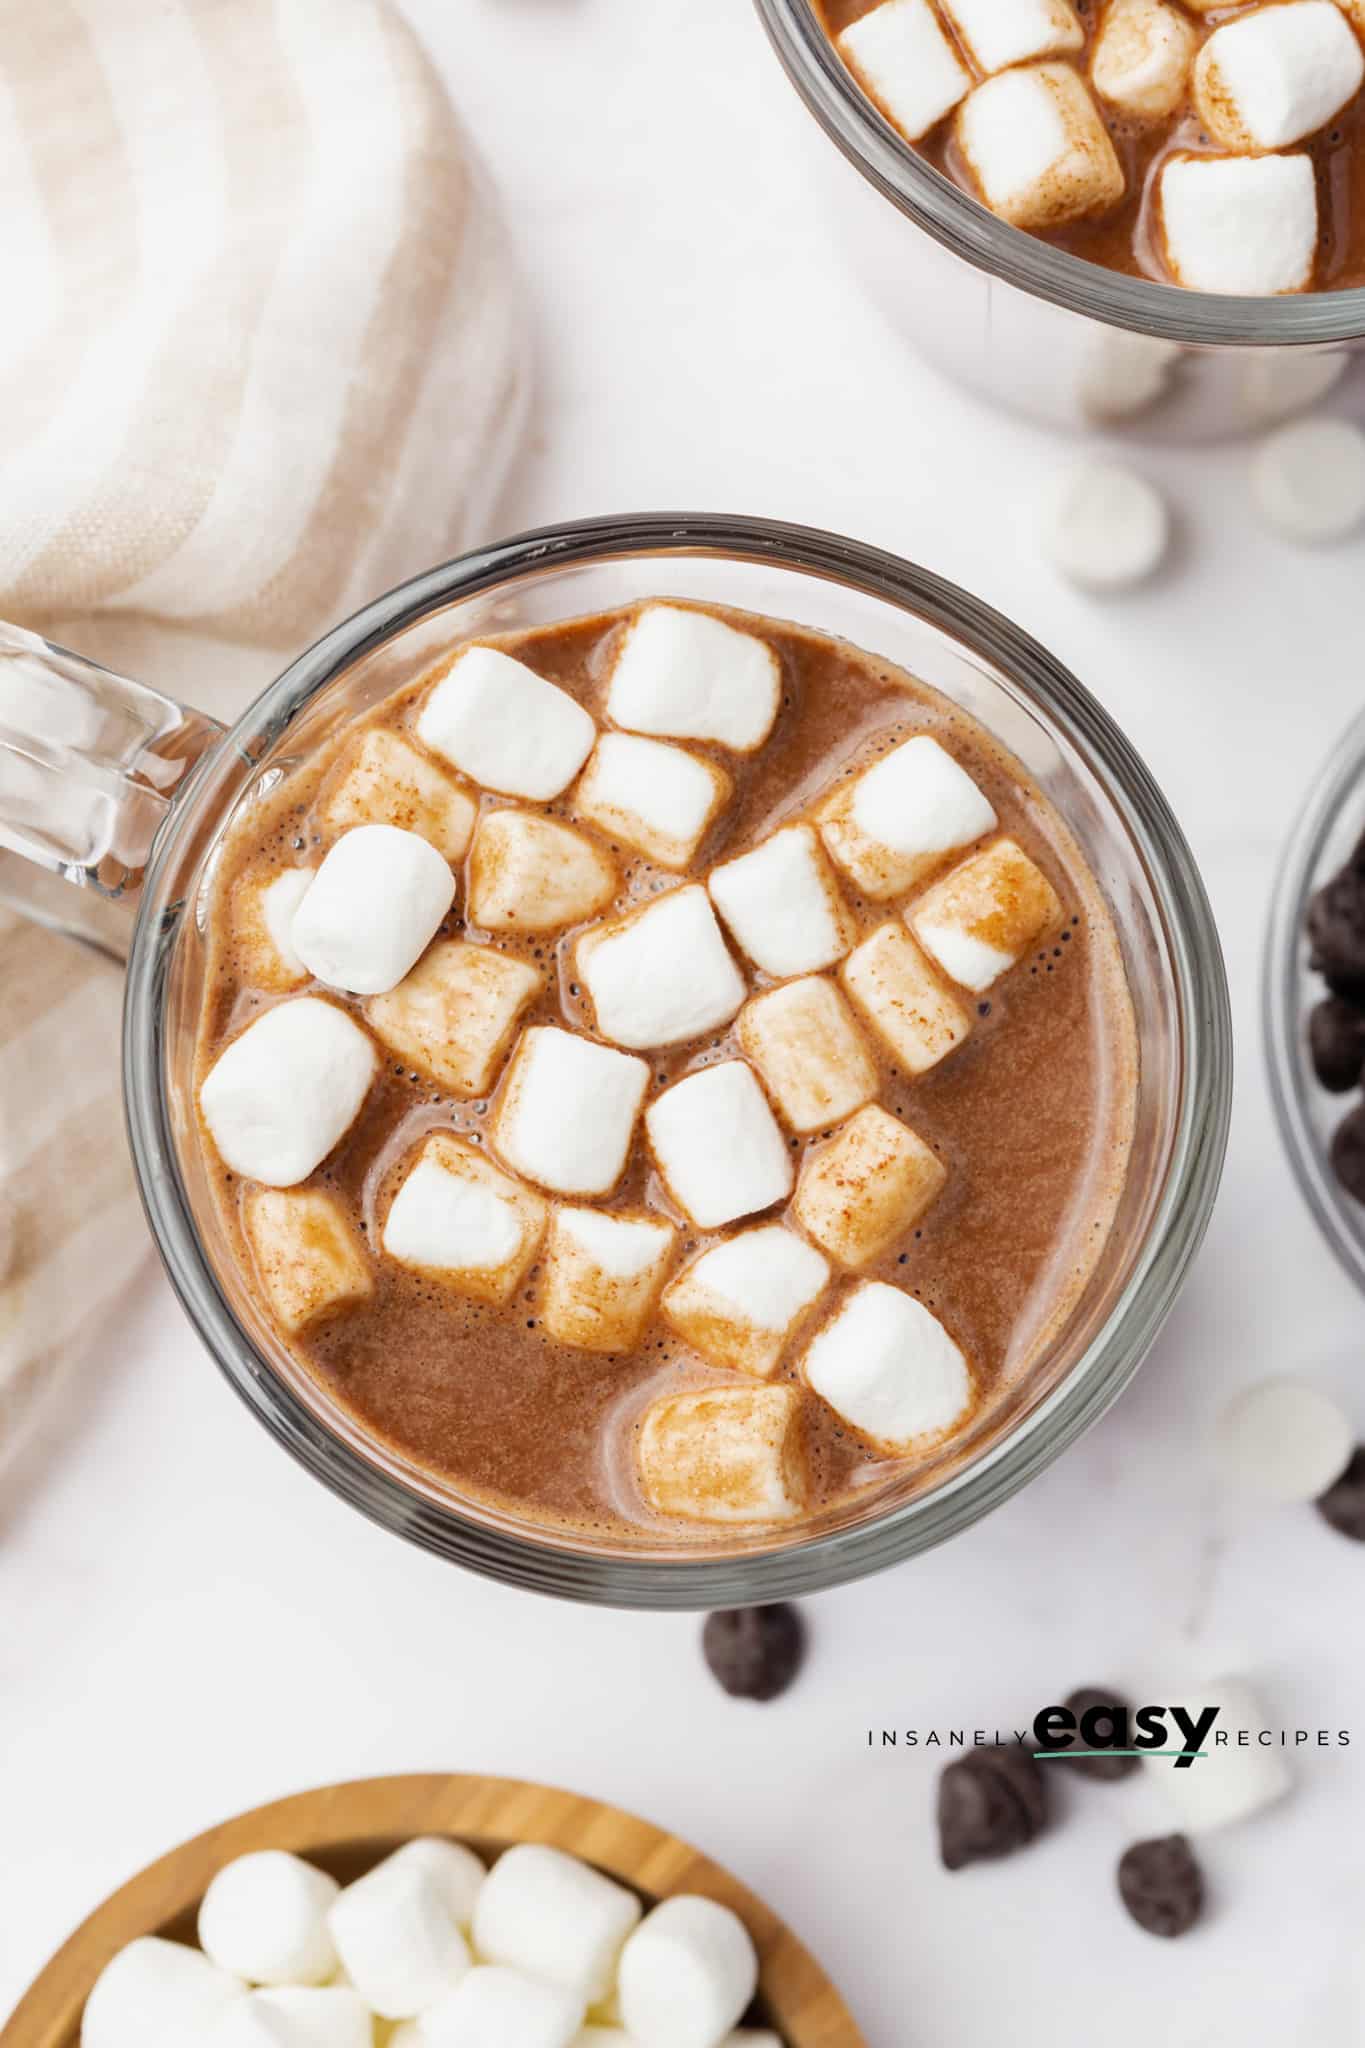 Top view photo of a glass mug filled with Vegan Hot Chocolate and mini marshmallows. There is a wooden bowl with marshmallows below the mug and another mug of hot chocolate above the center mug. 